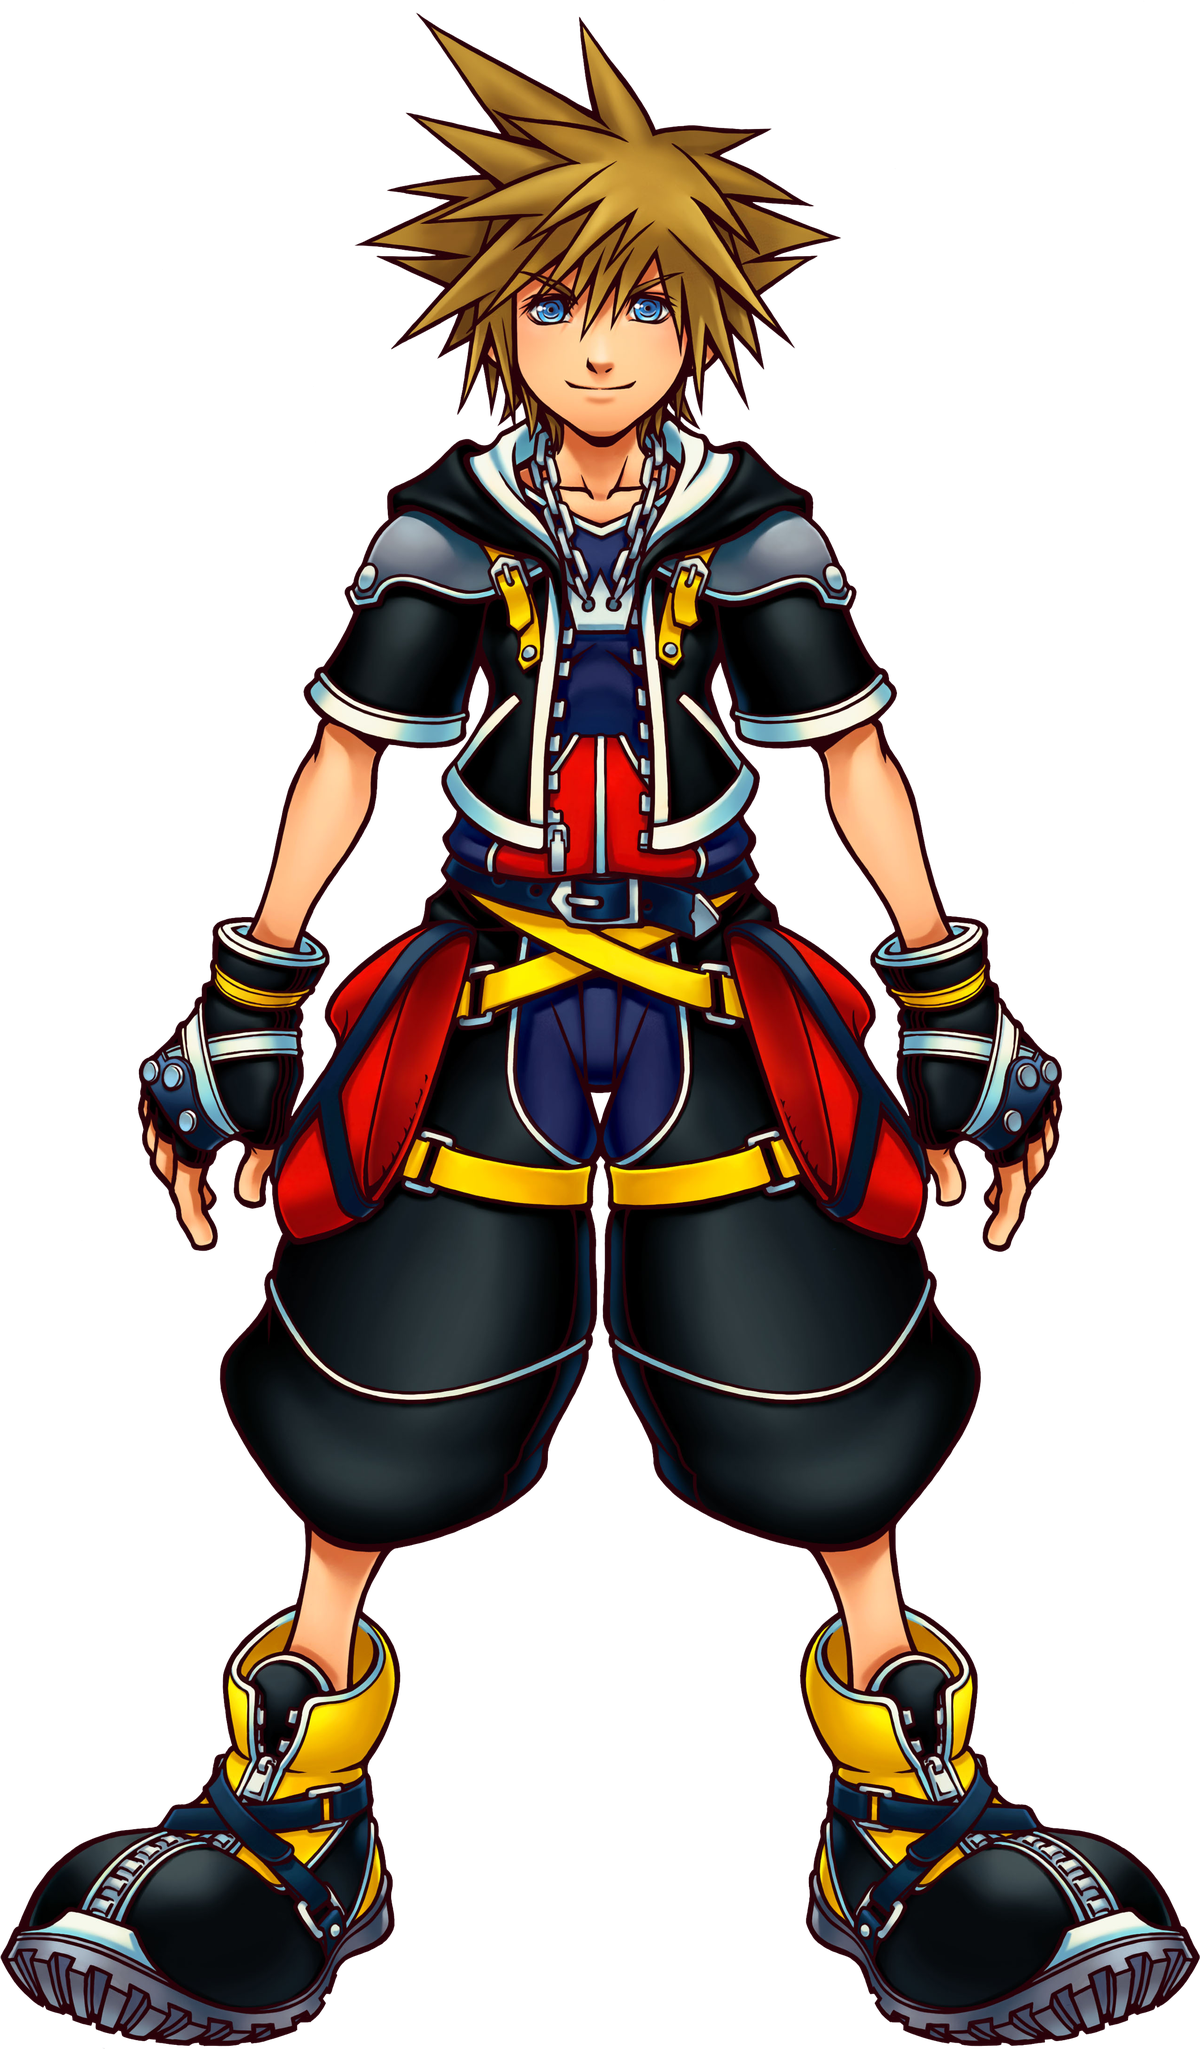 A picture of Sora from KH2